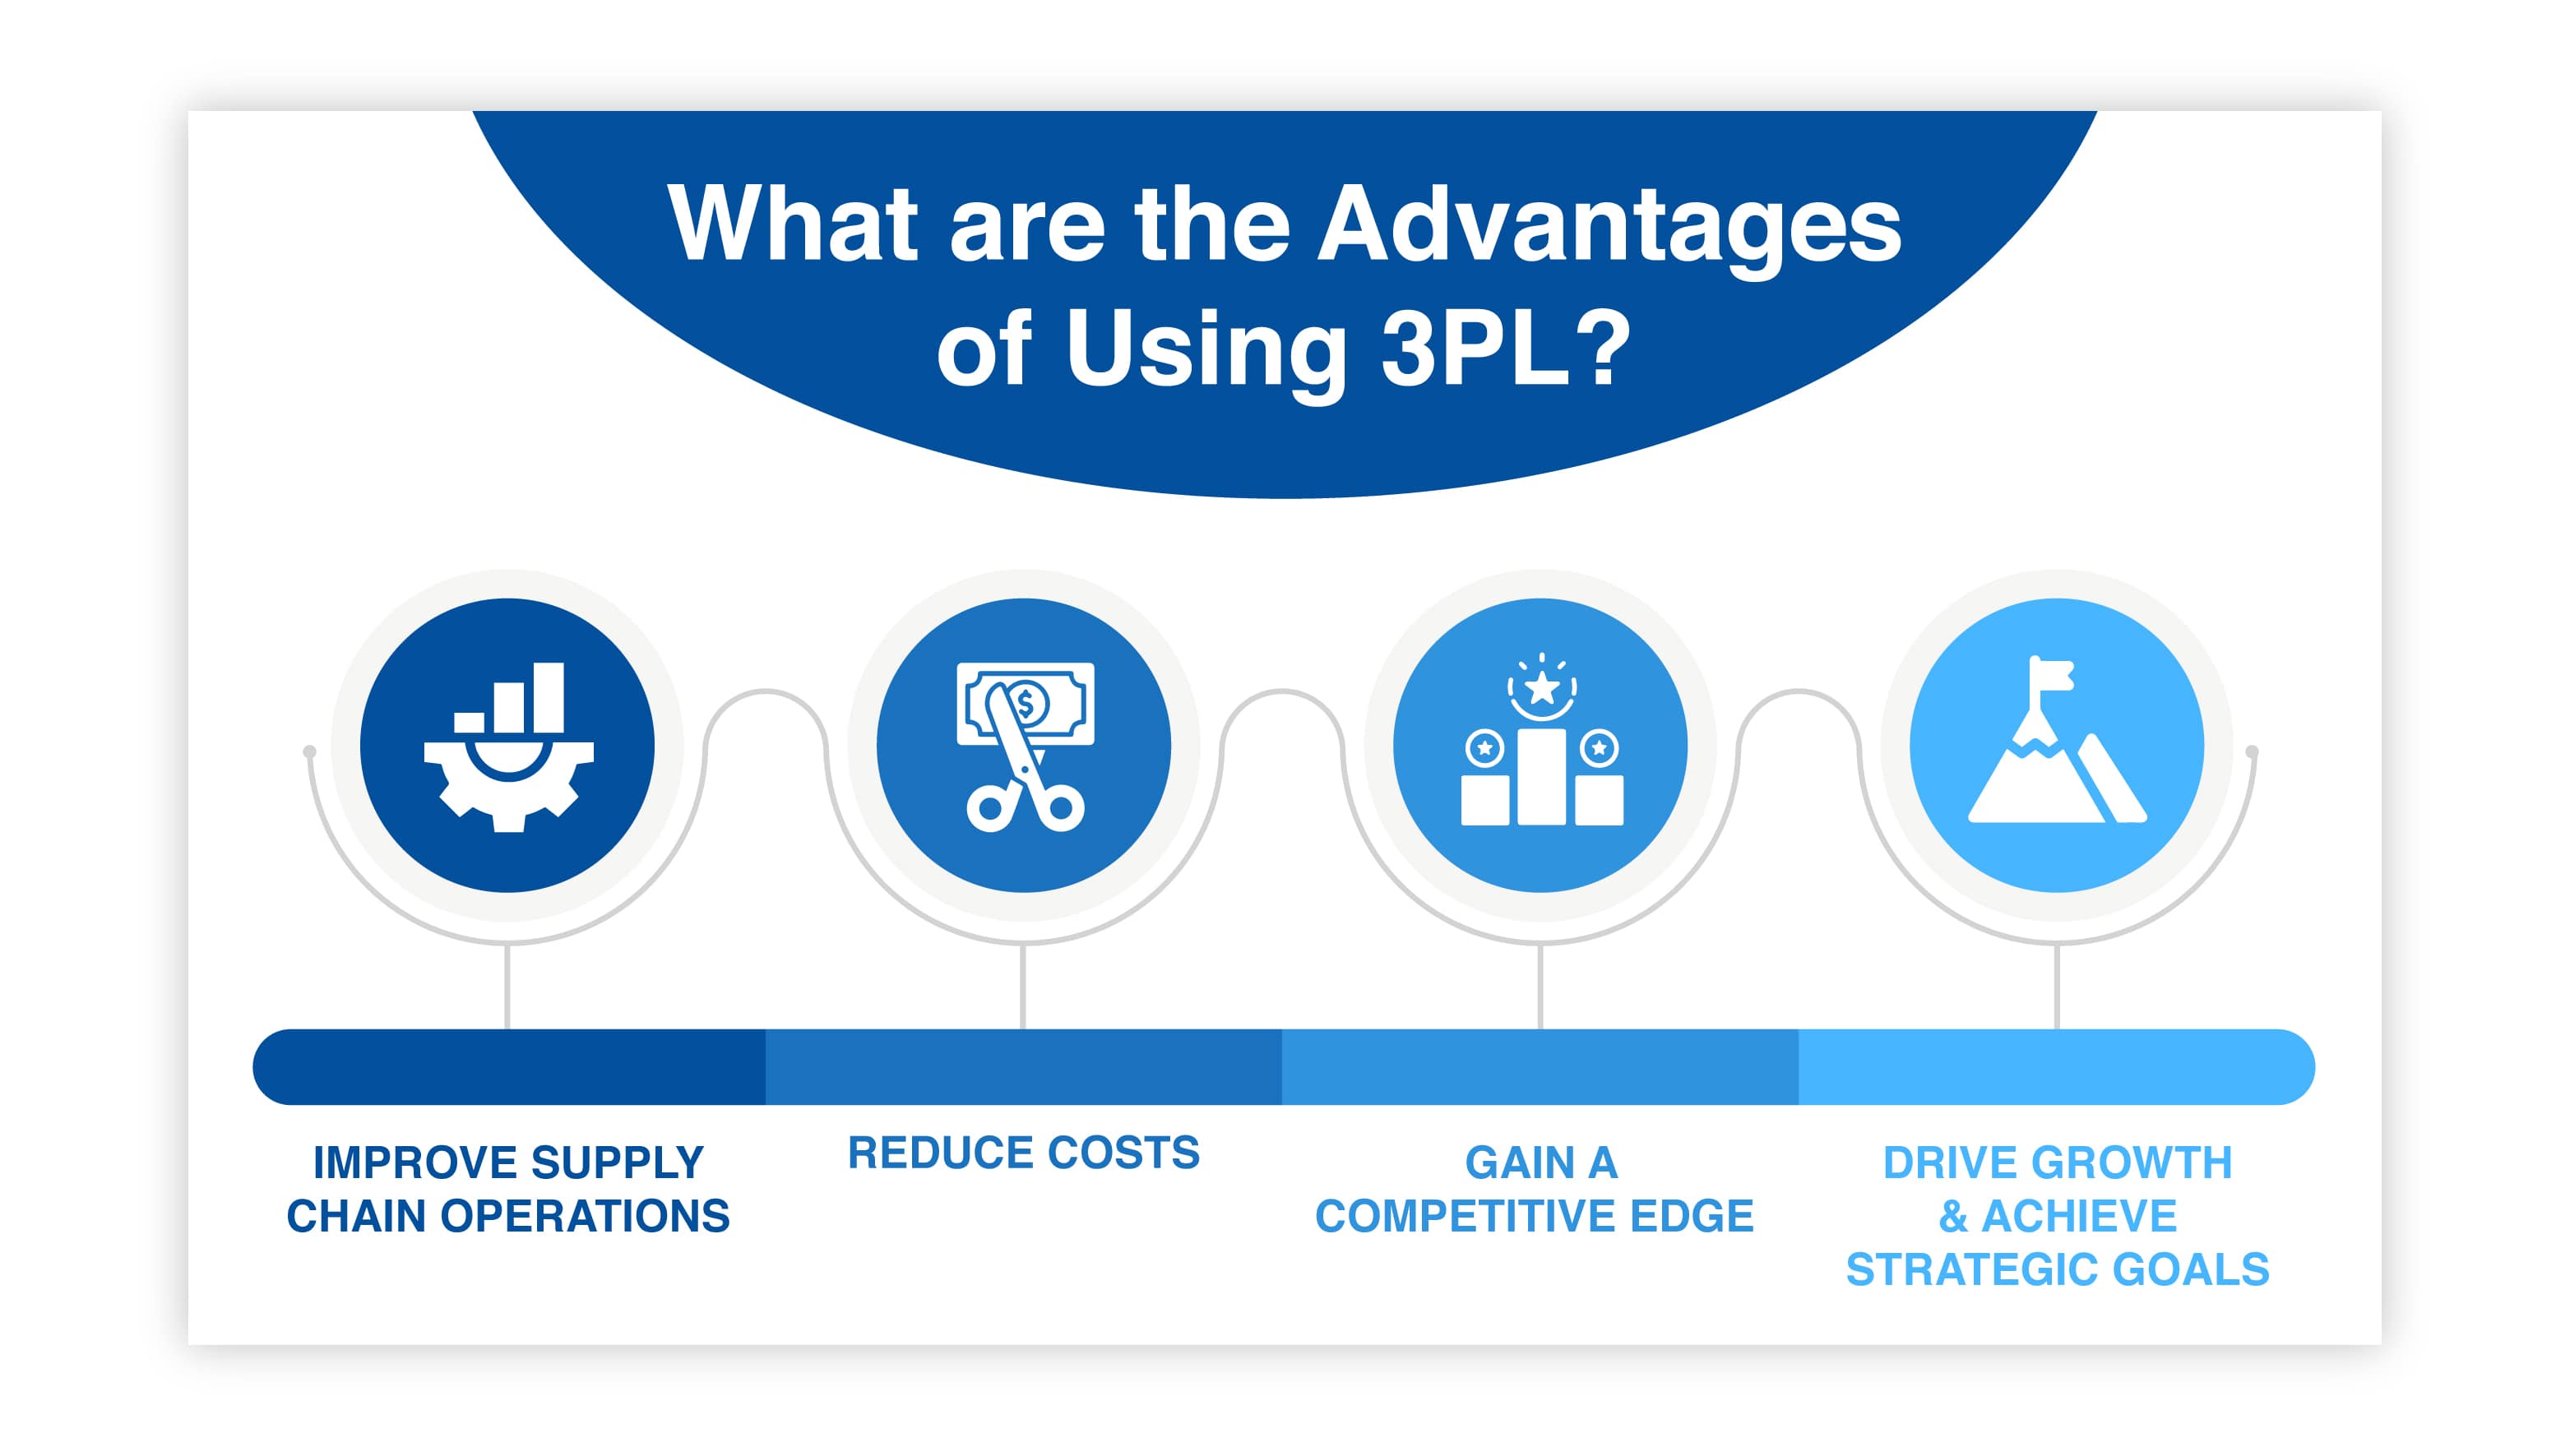 What are the Advantages of Using 3PL?